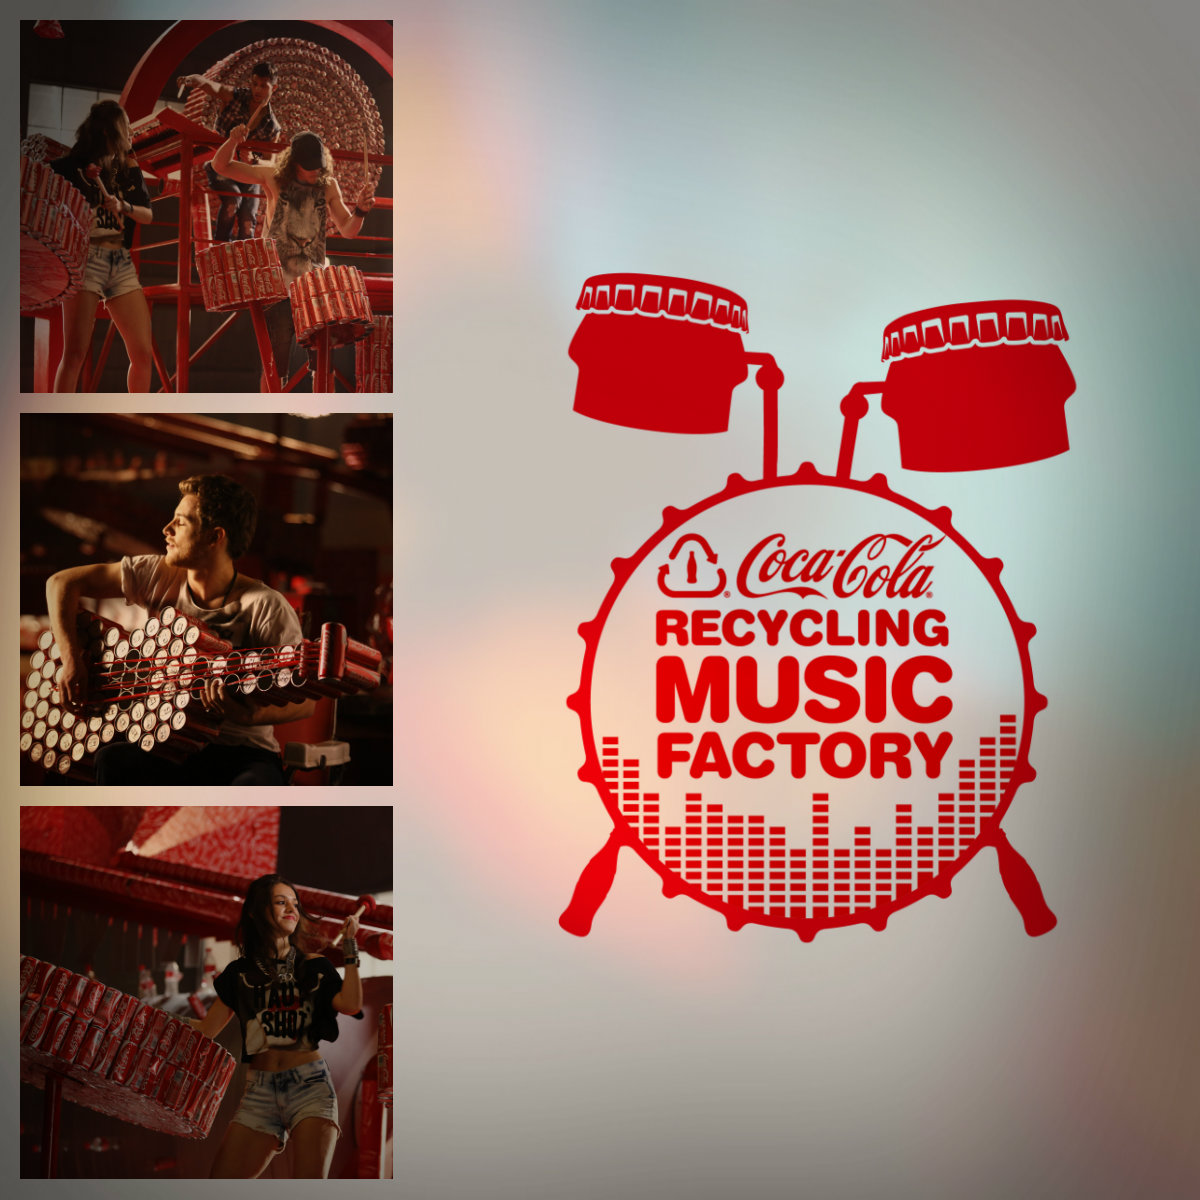 Coca-Cola Recycling Music Factory